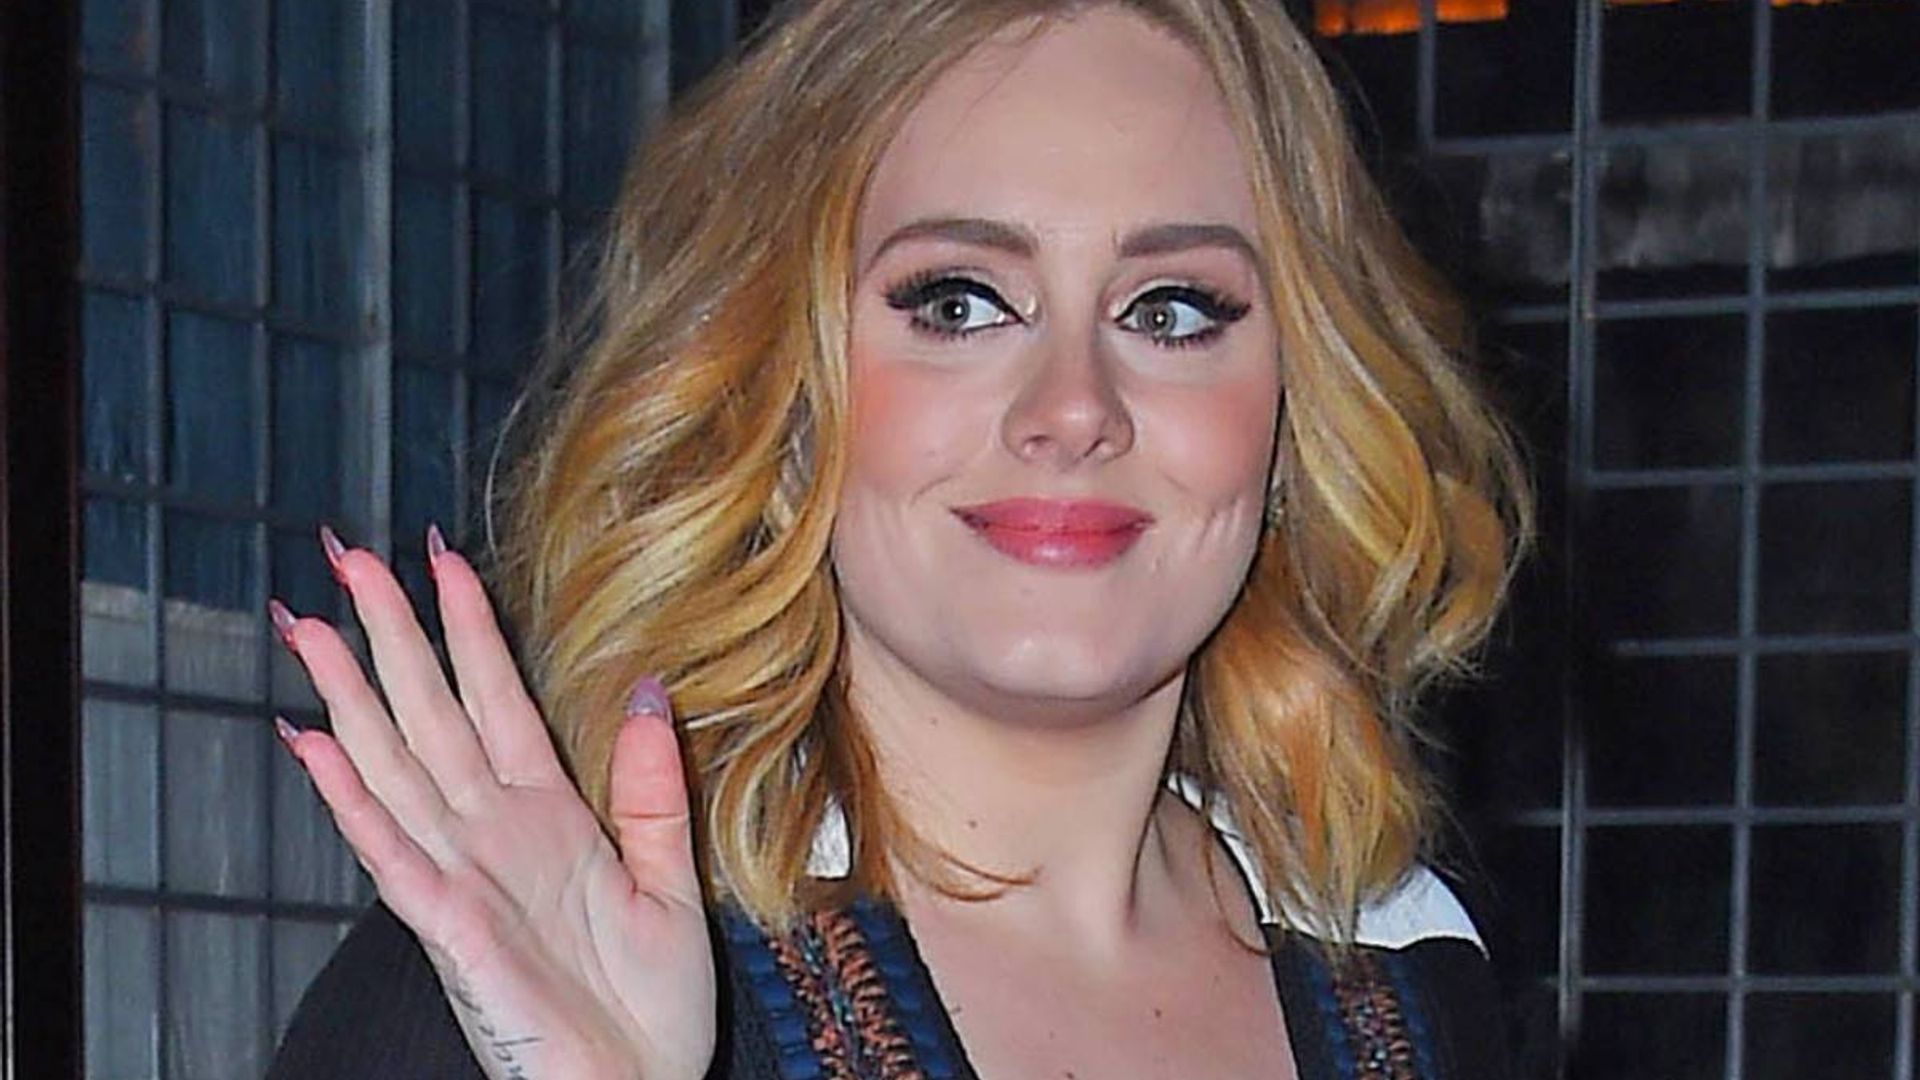 Adele showcases toned legs in leather mini skirt and figure-hugging jacket during jaw-dropping appearance